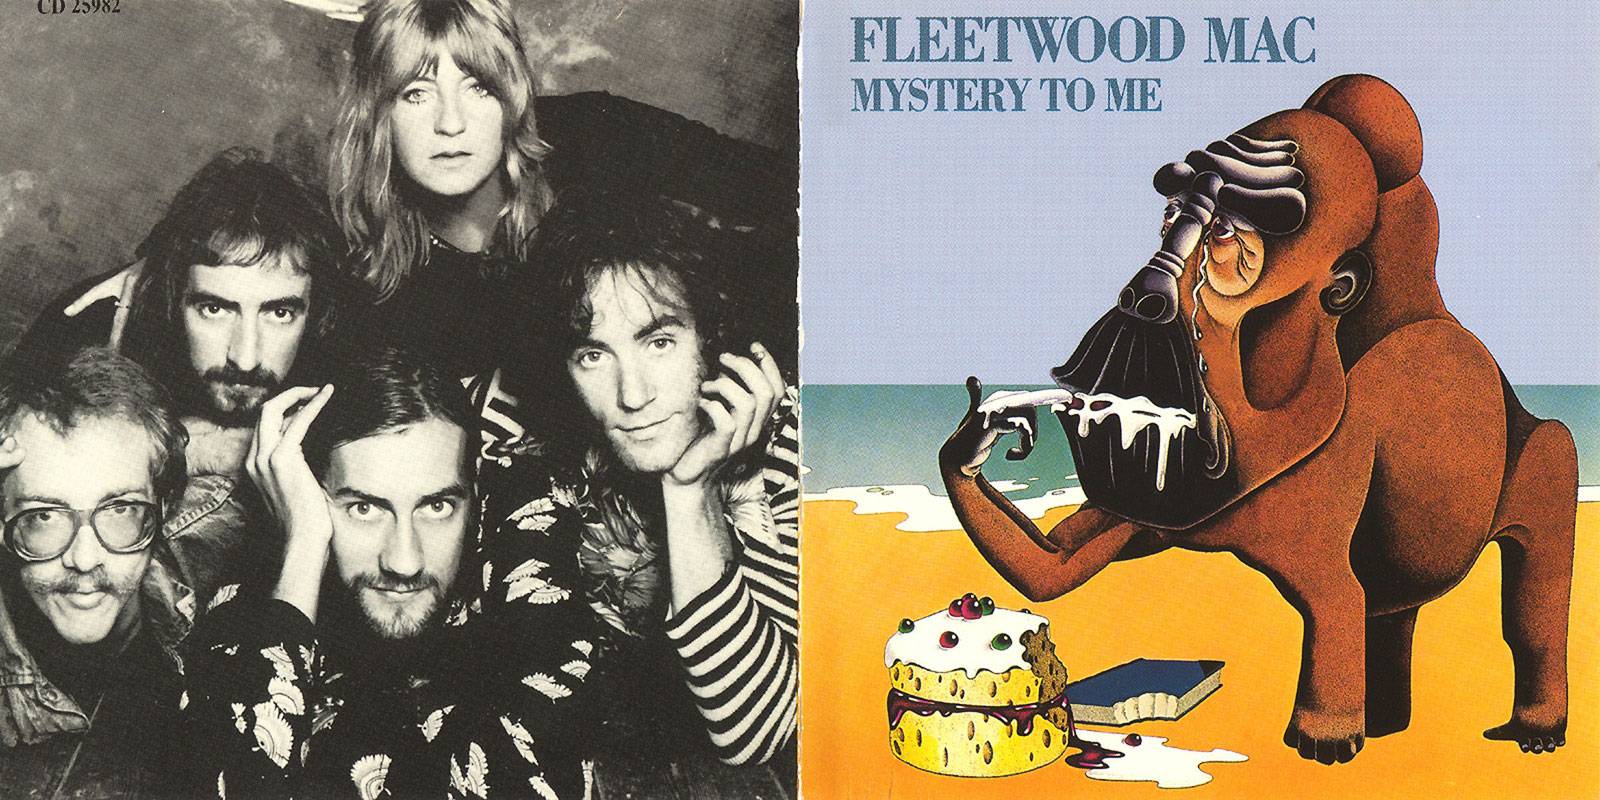 Fleetwood mac mystery to me download free